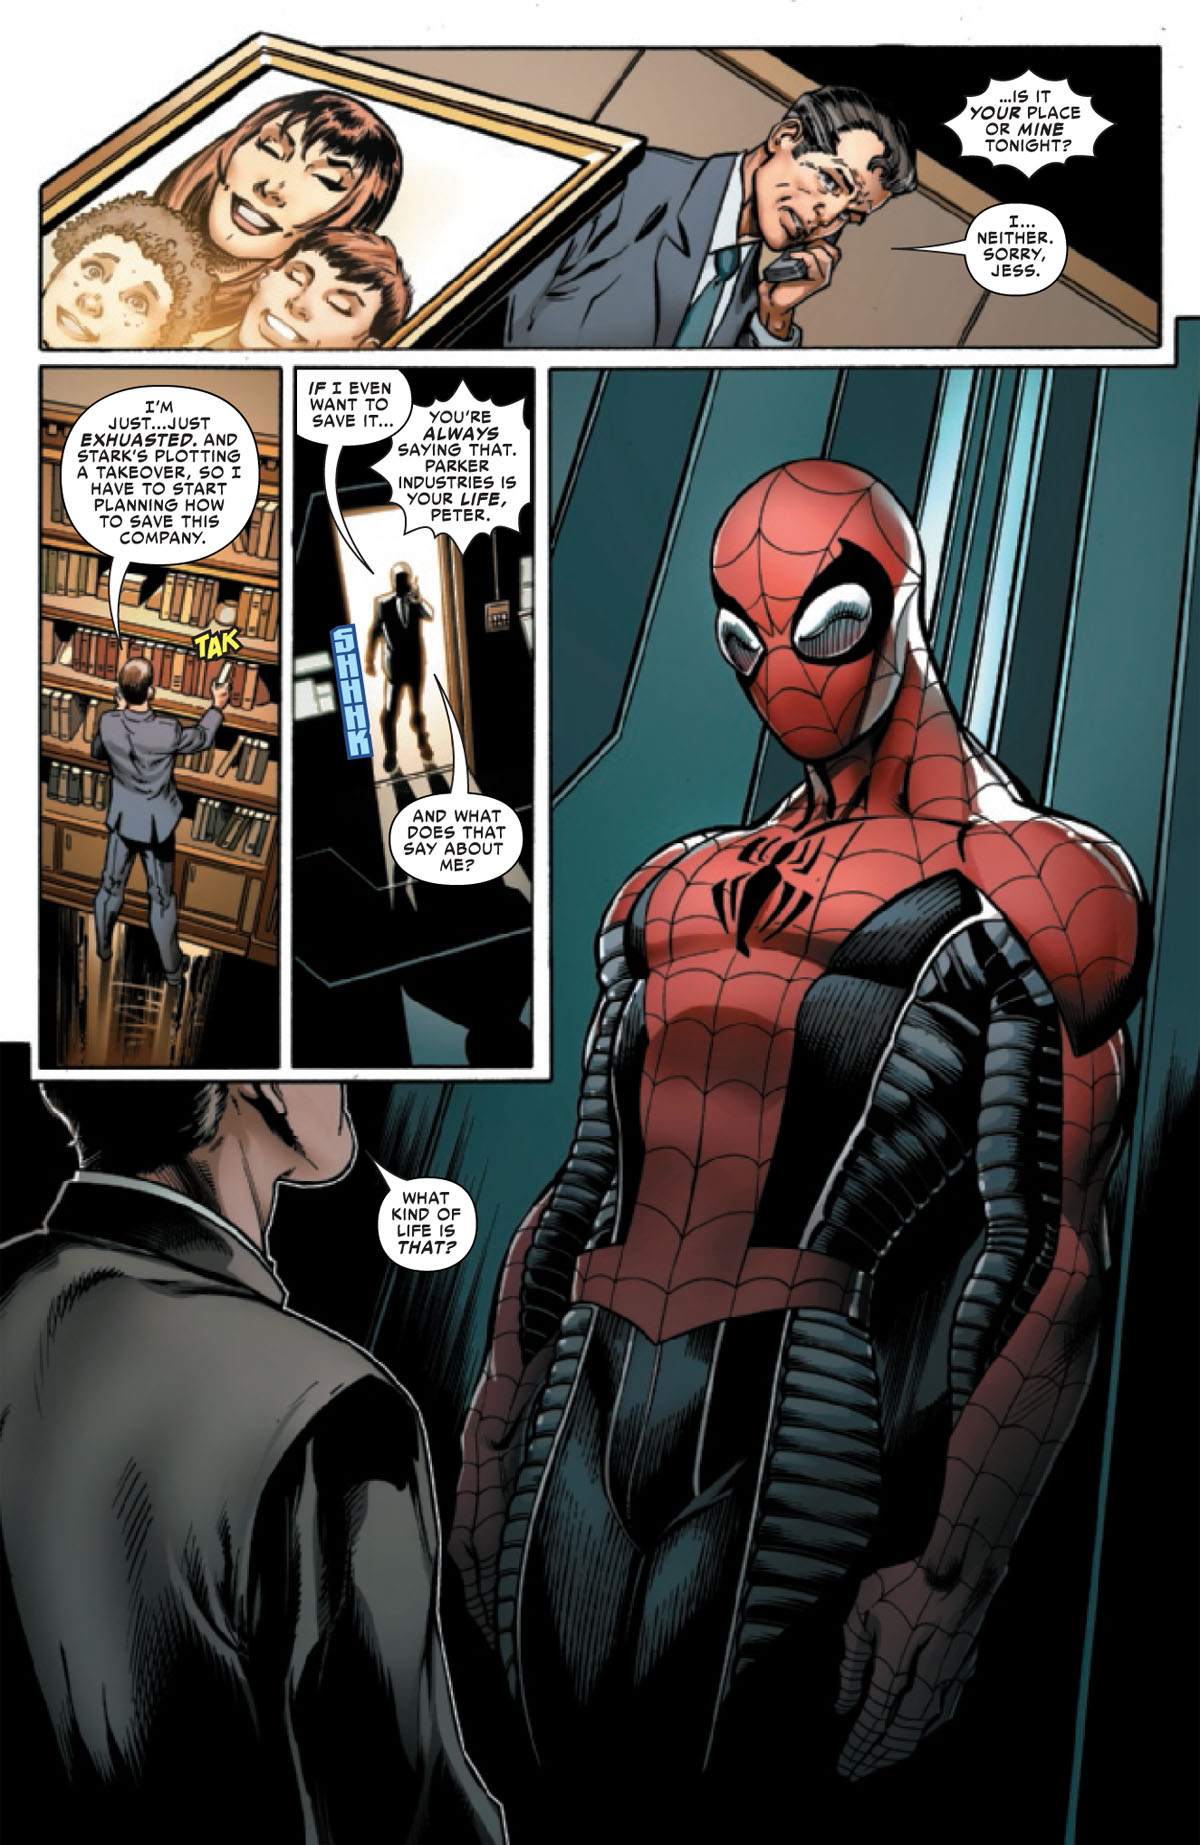 Spider-Man: Life Story #4 page 5